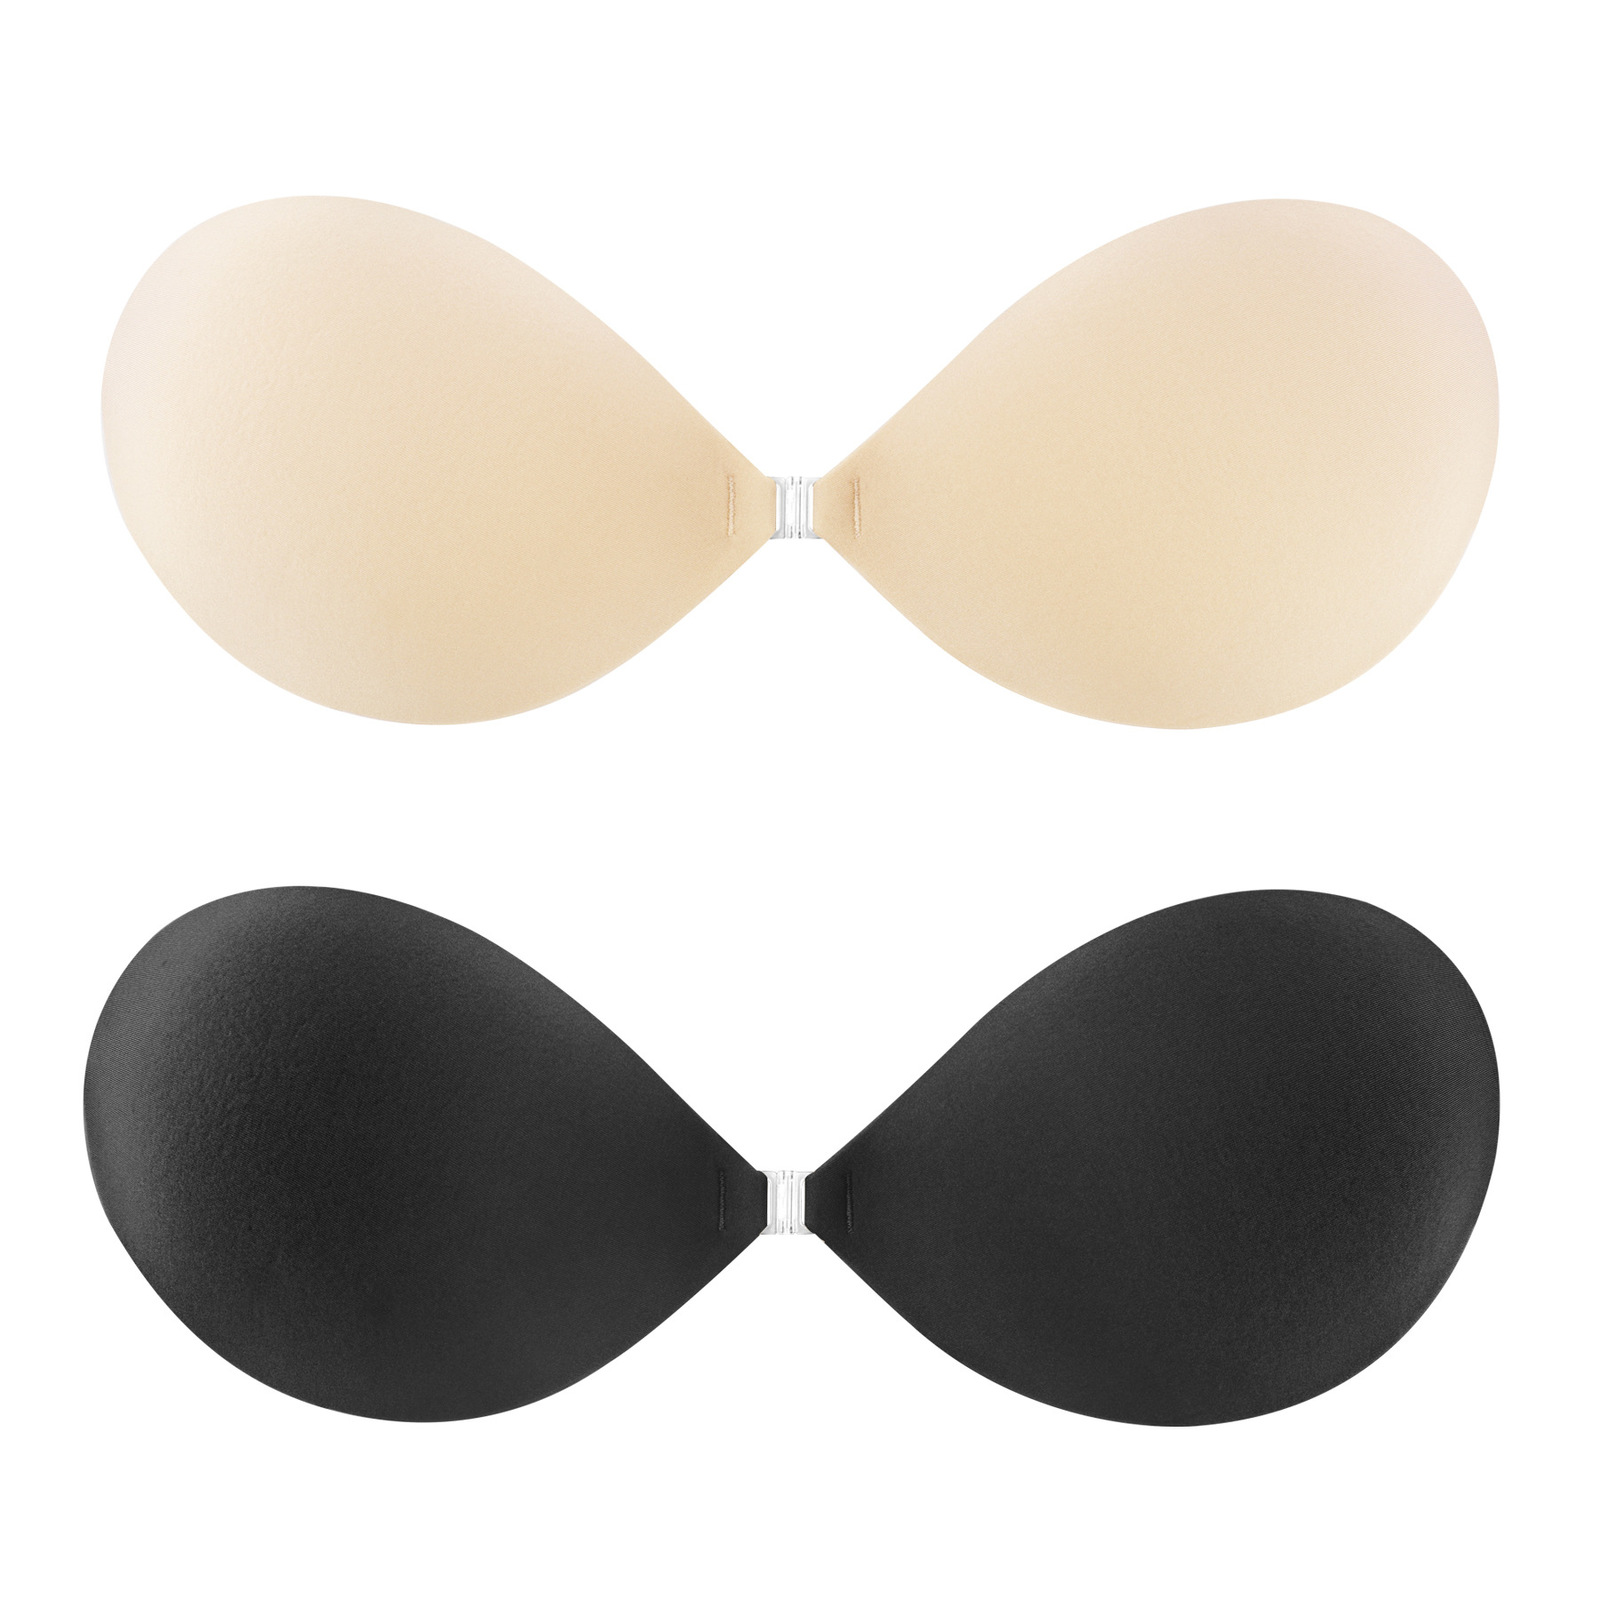 Pack of 2 Women Hand Shape Front / Back Buckle Push Up Bra Strapless  Invisible Wireless Invisible Strapless 